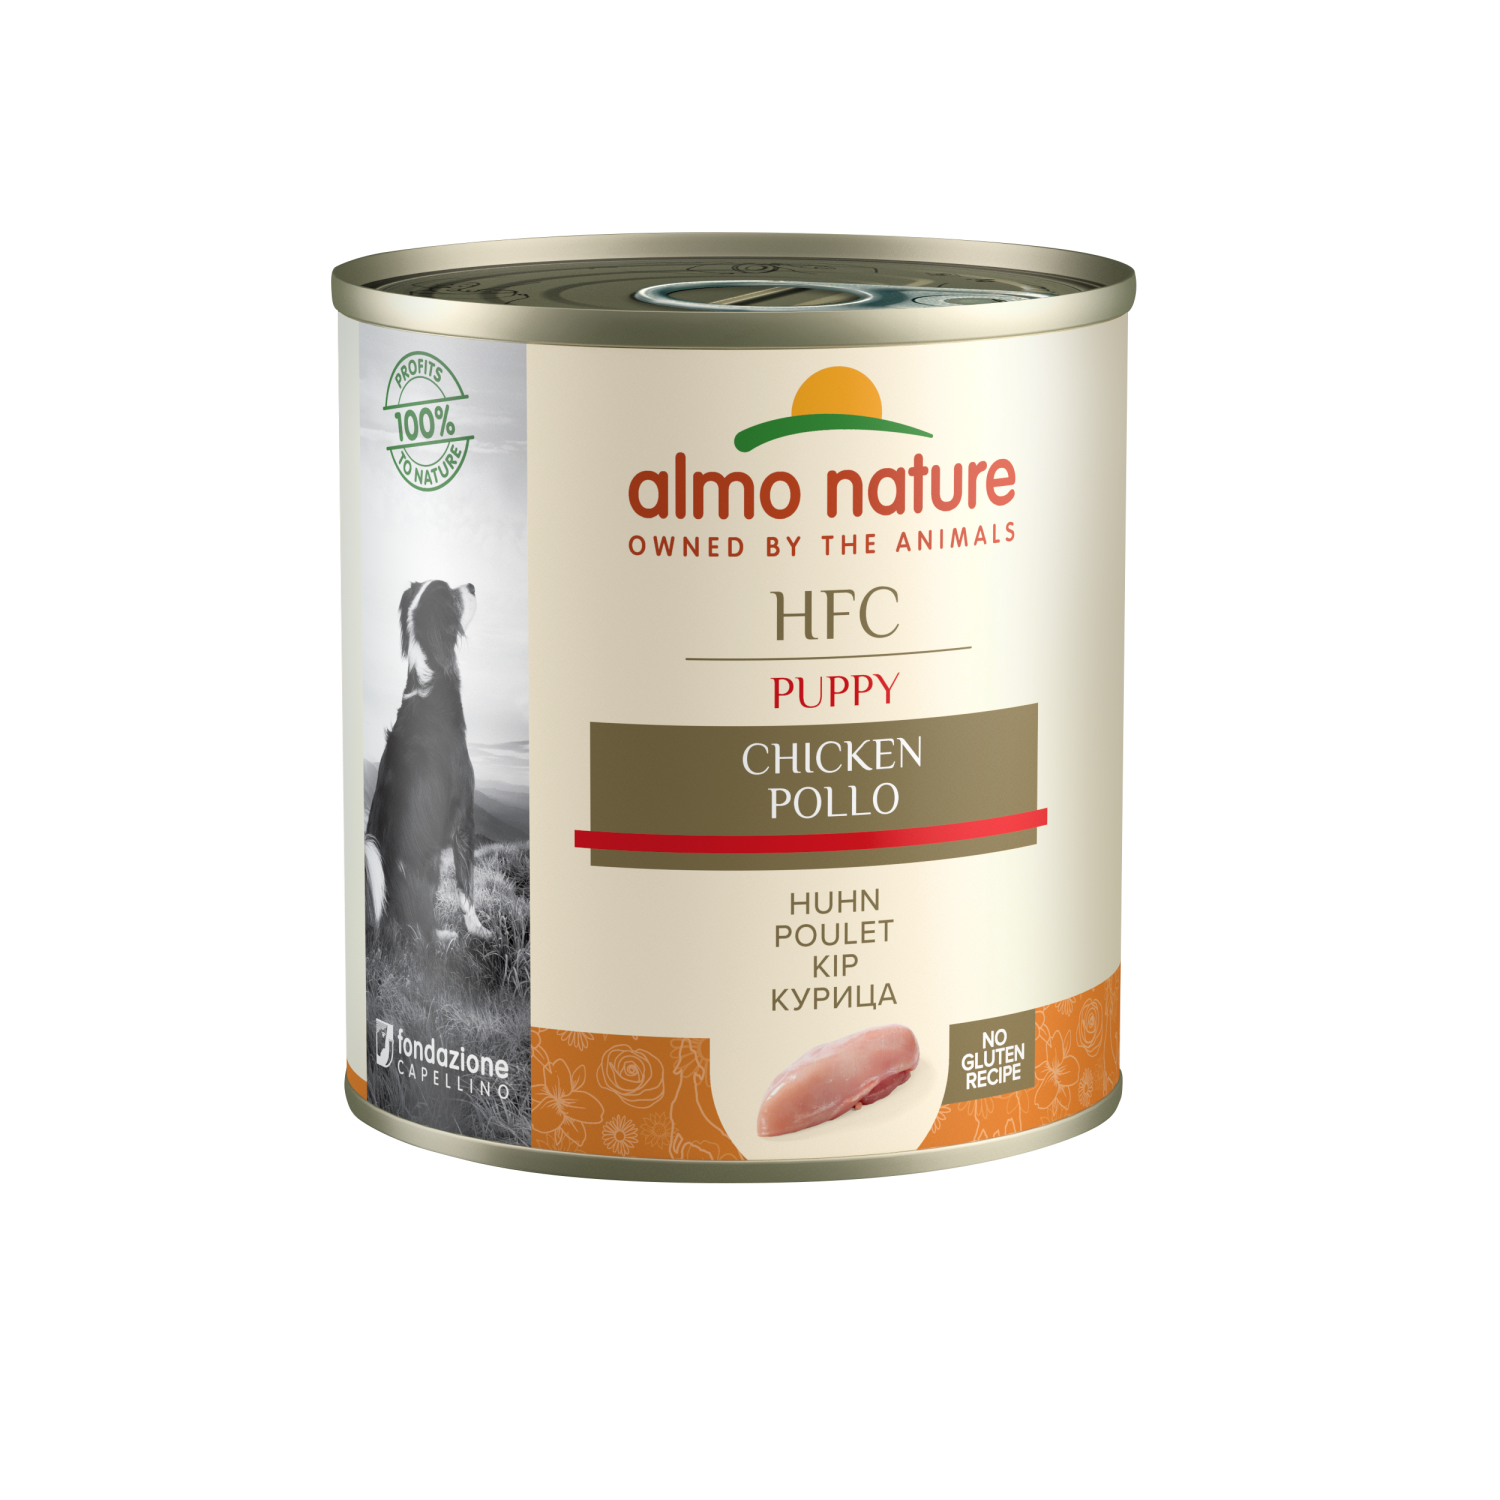 ALMO NATURE CLASSIC DOGS 280G PUPPY KYLLING FILLET (12)